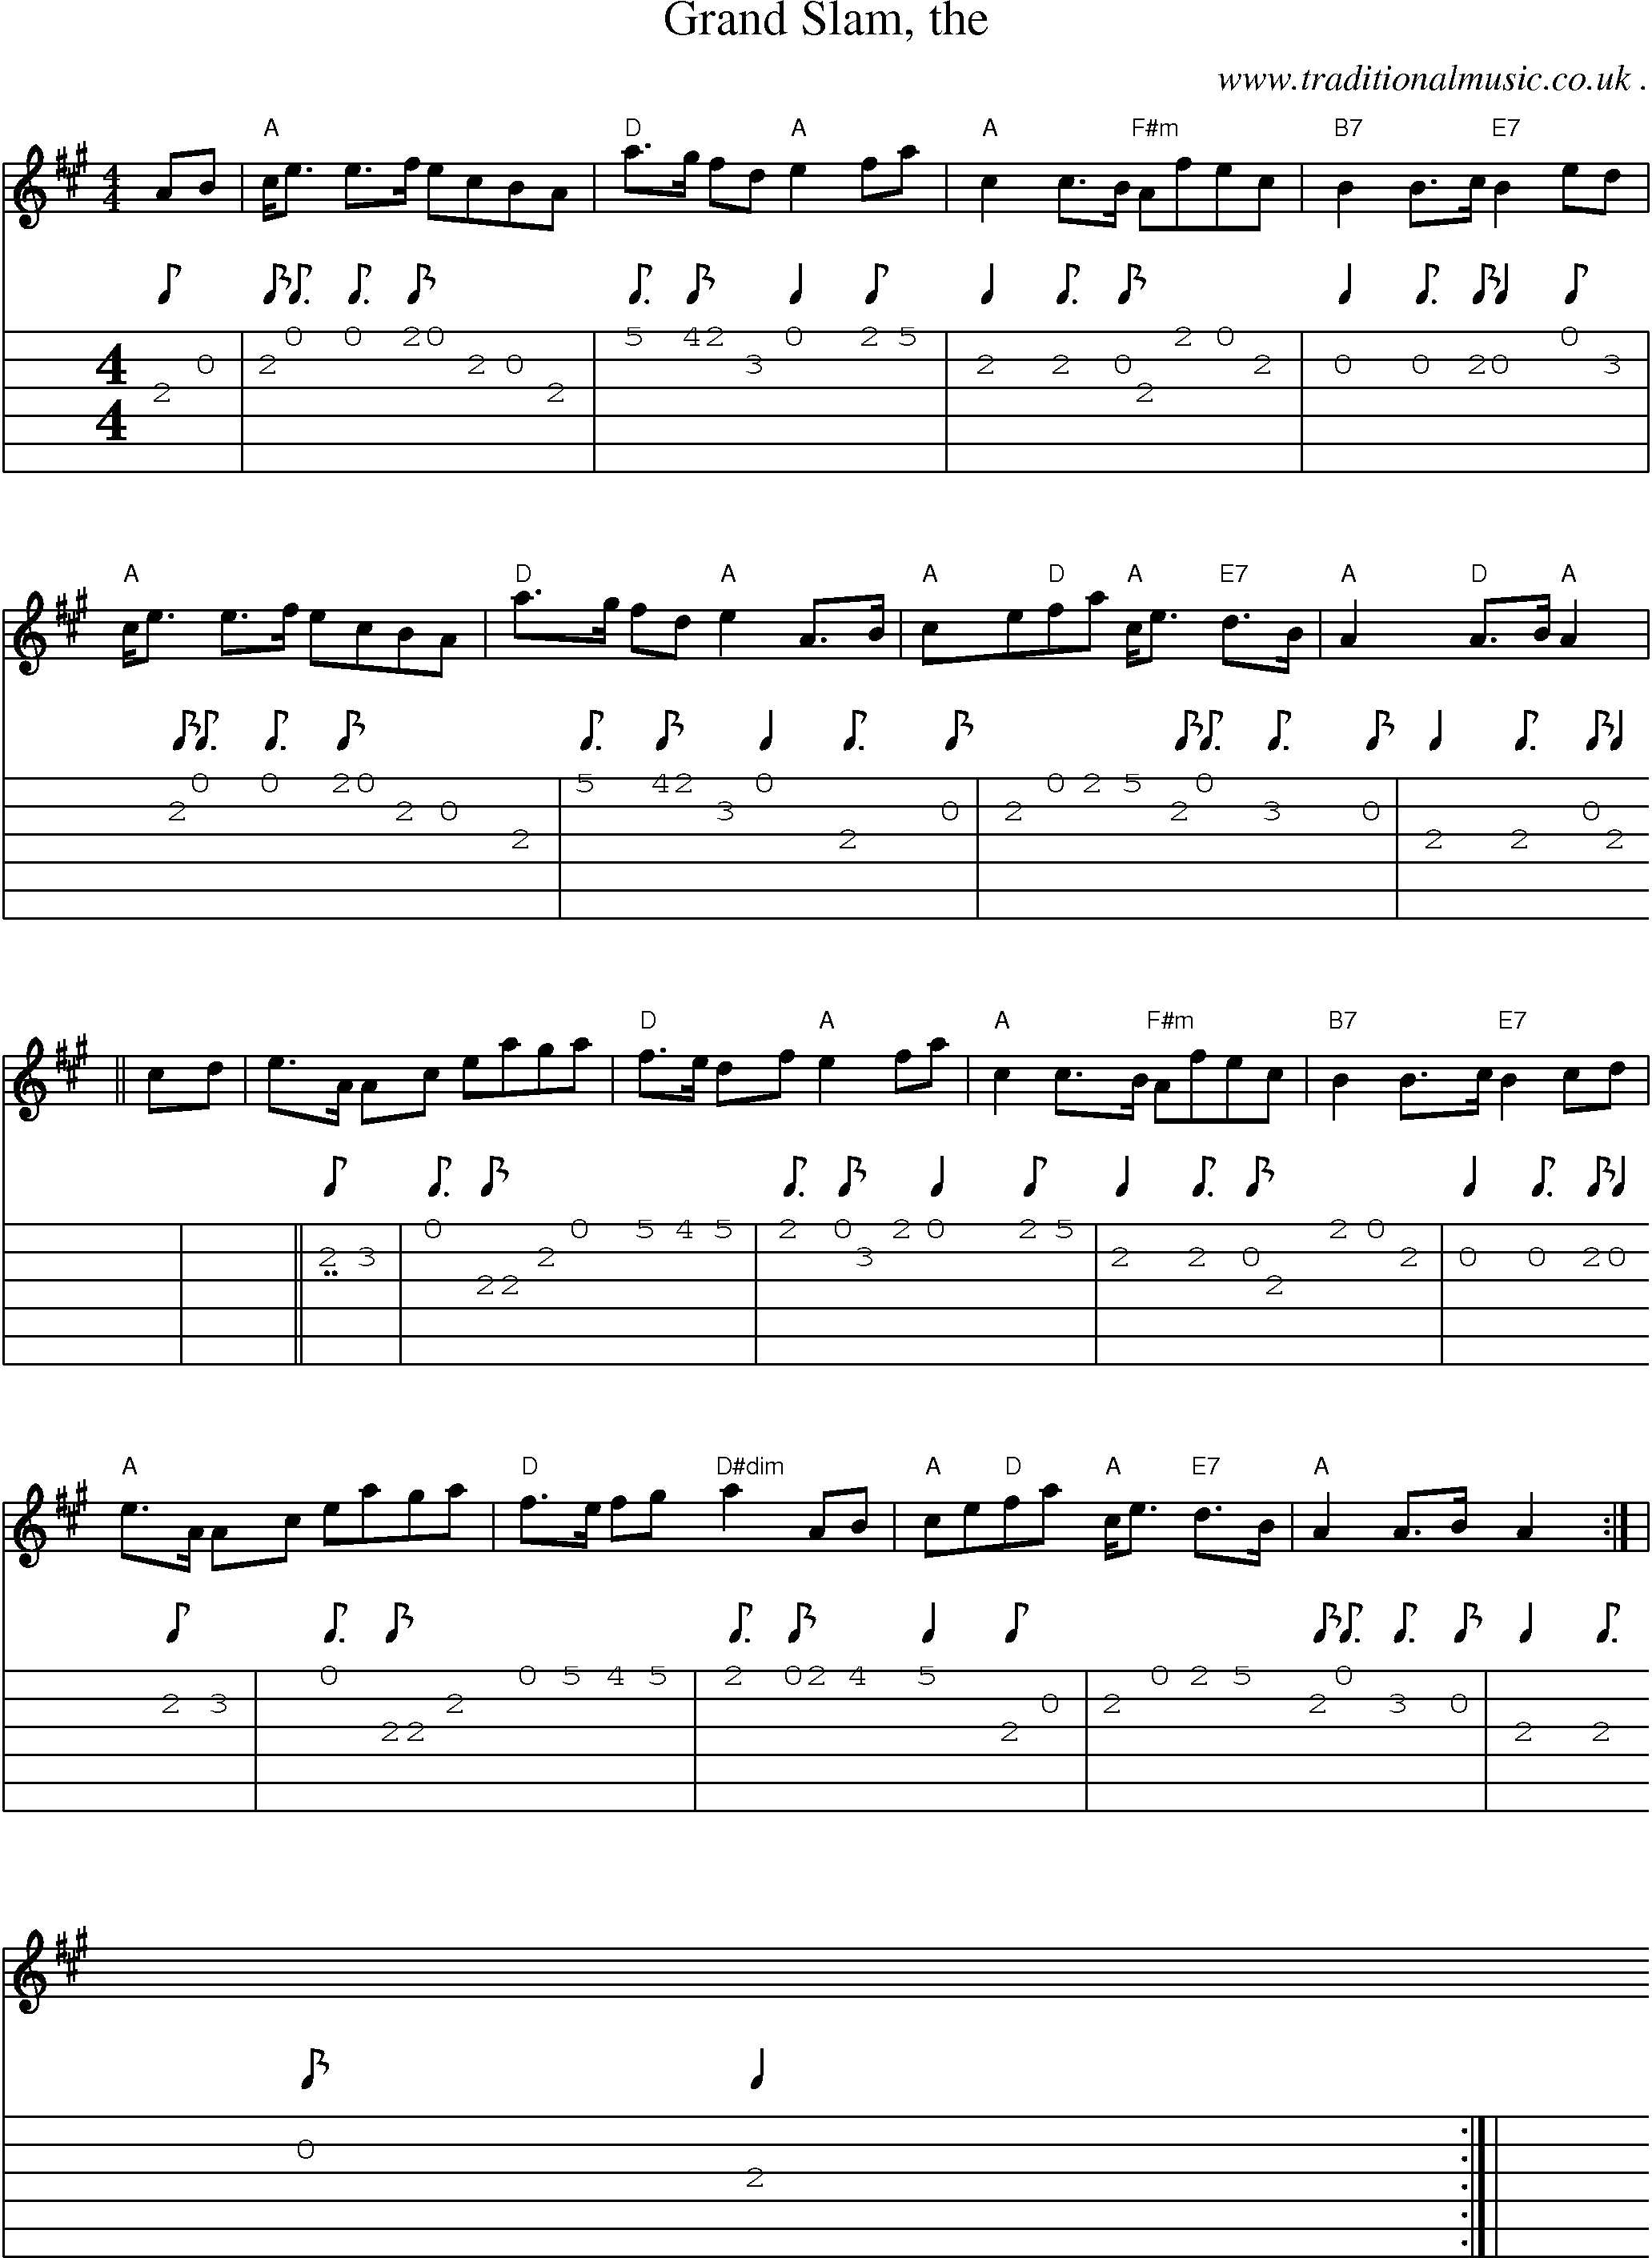 Sheet-music  score, Chords and Guitar Tabs for Grand Slam The